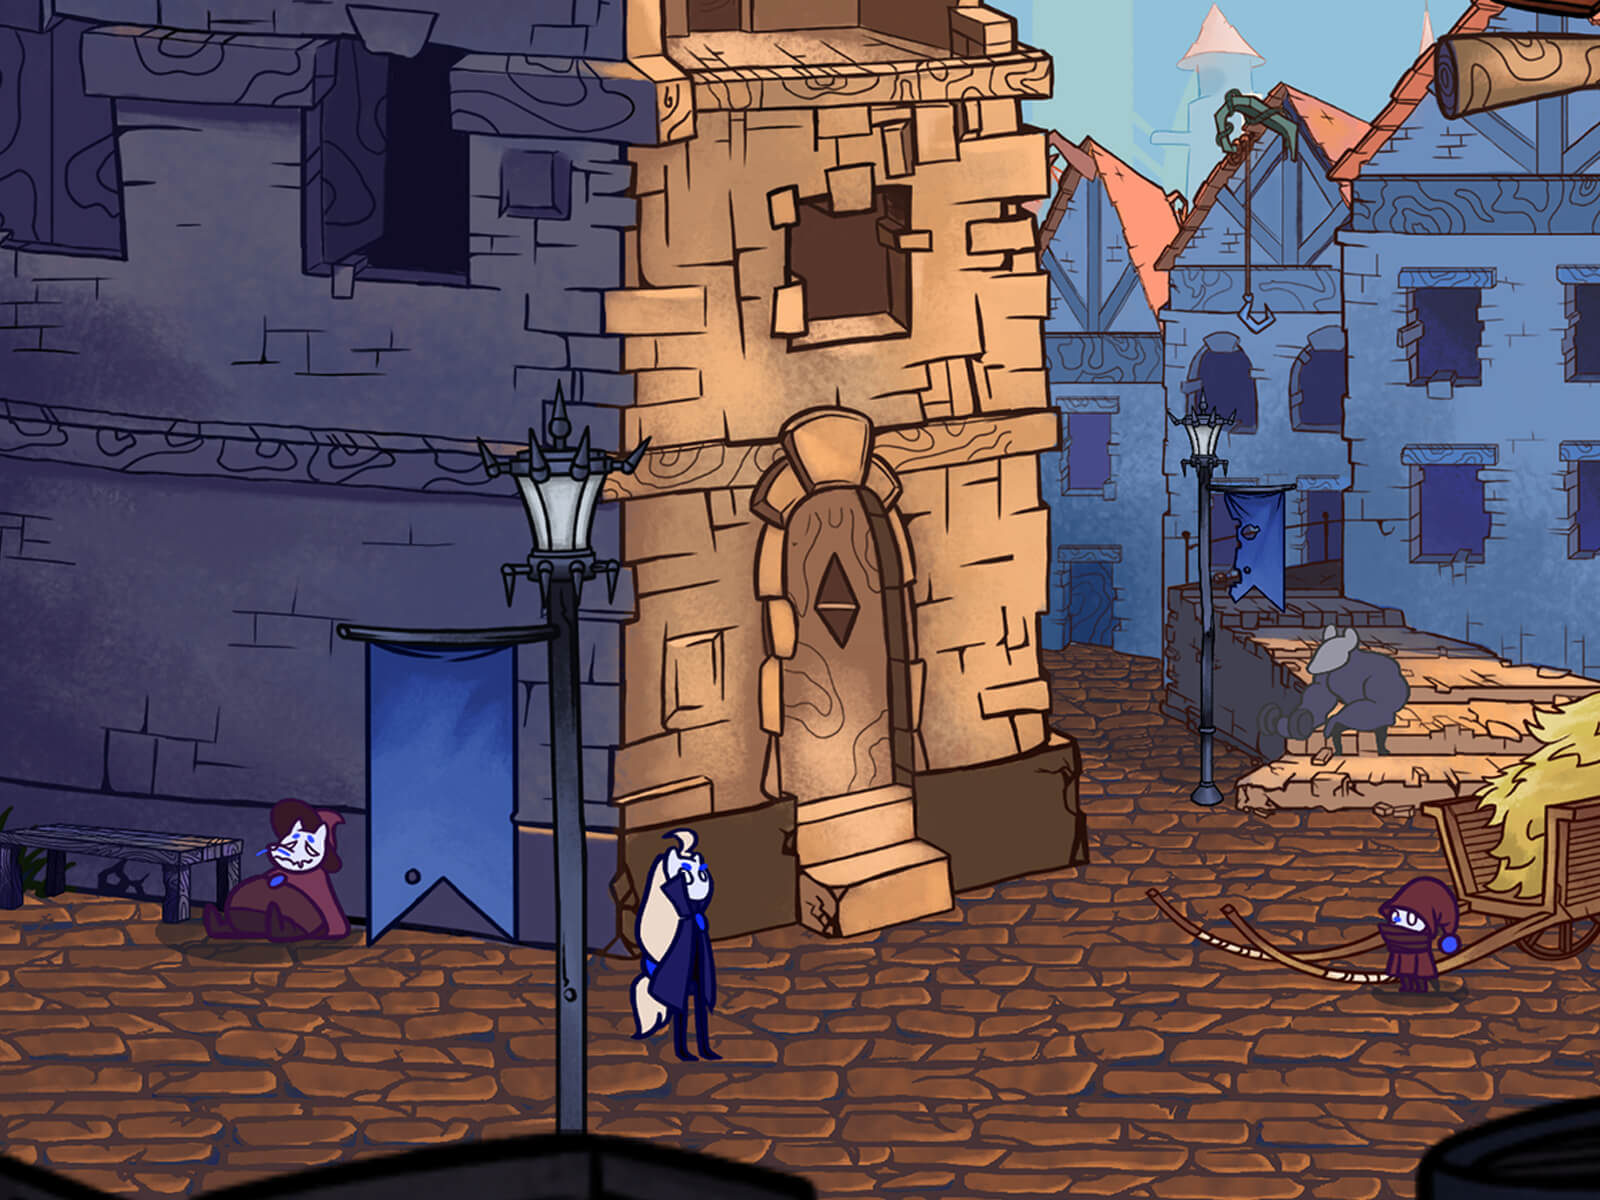 Screenshot from award-winning-student-game Jera, featuring a village scene with various characters